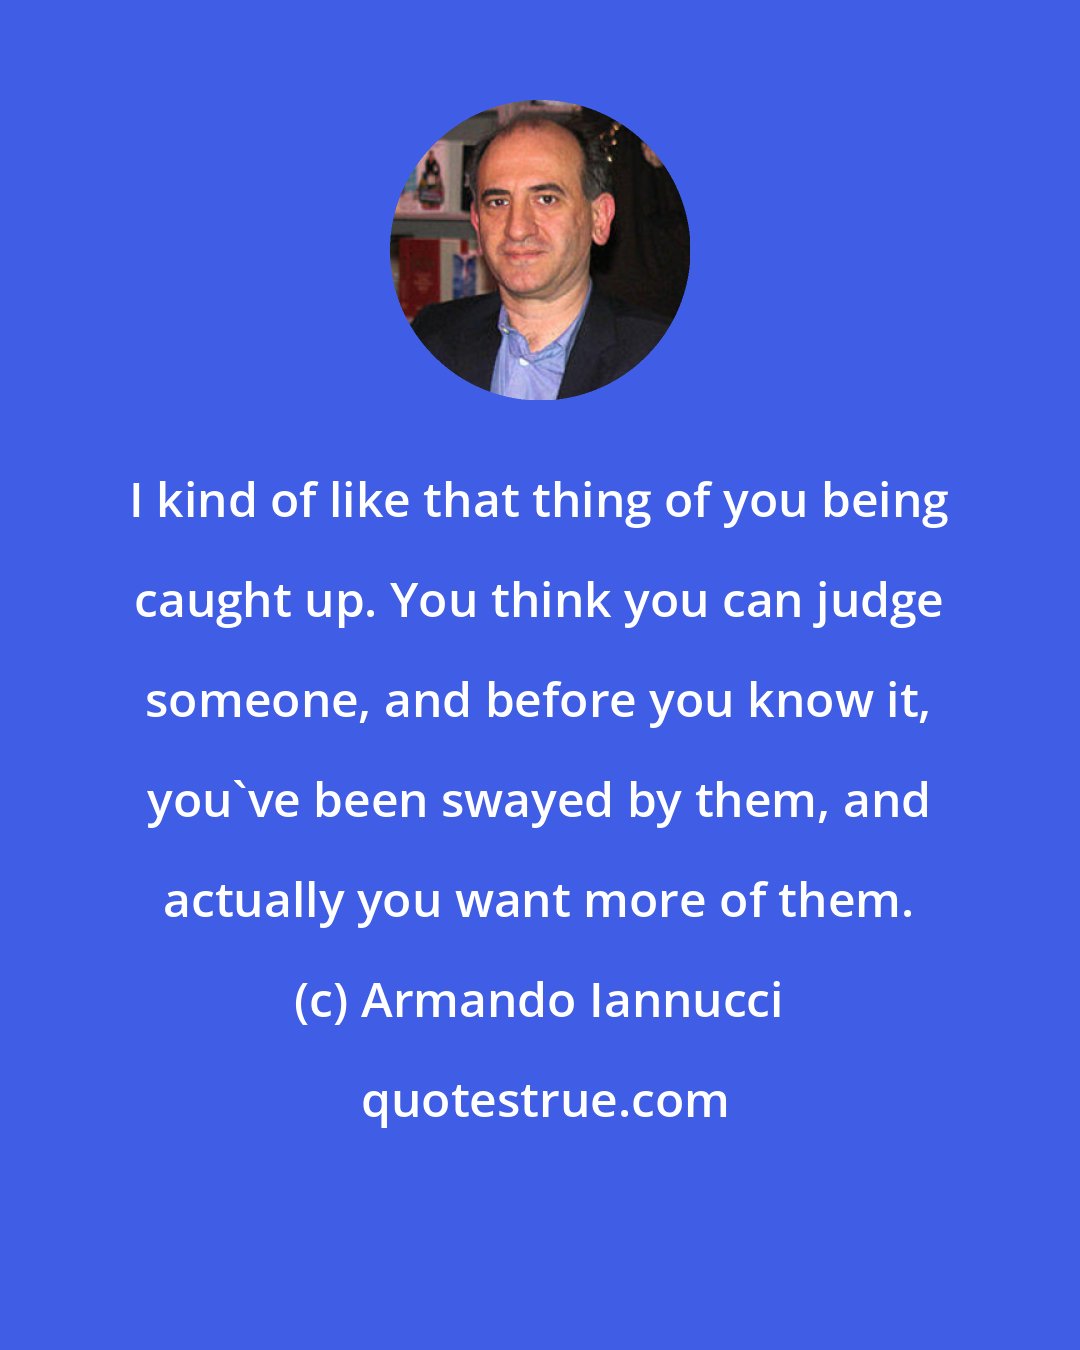 Armando Iannucci: I kind of like that thing of you being caught up. You think you can judge someone, and before you know it, you've been swayed by them, and actually you want more of them.